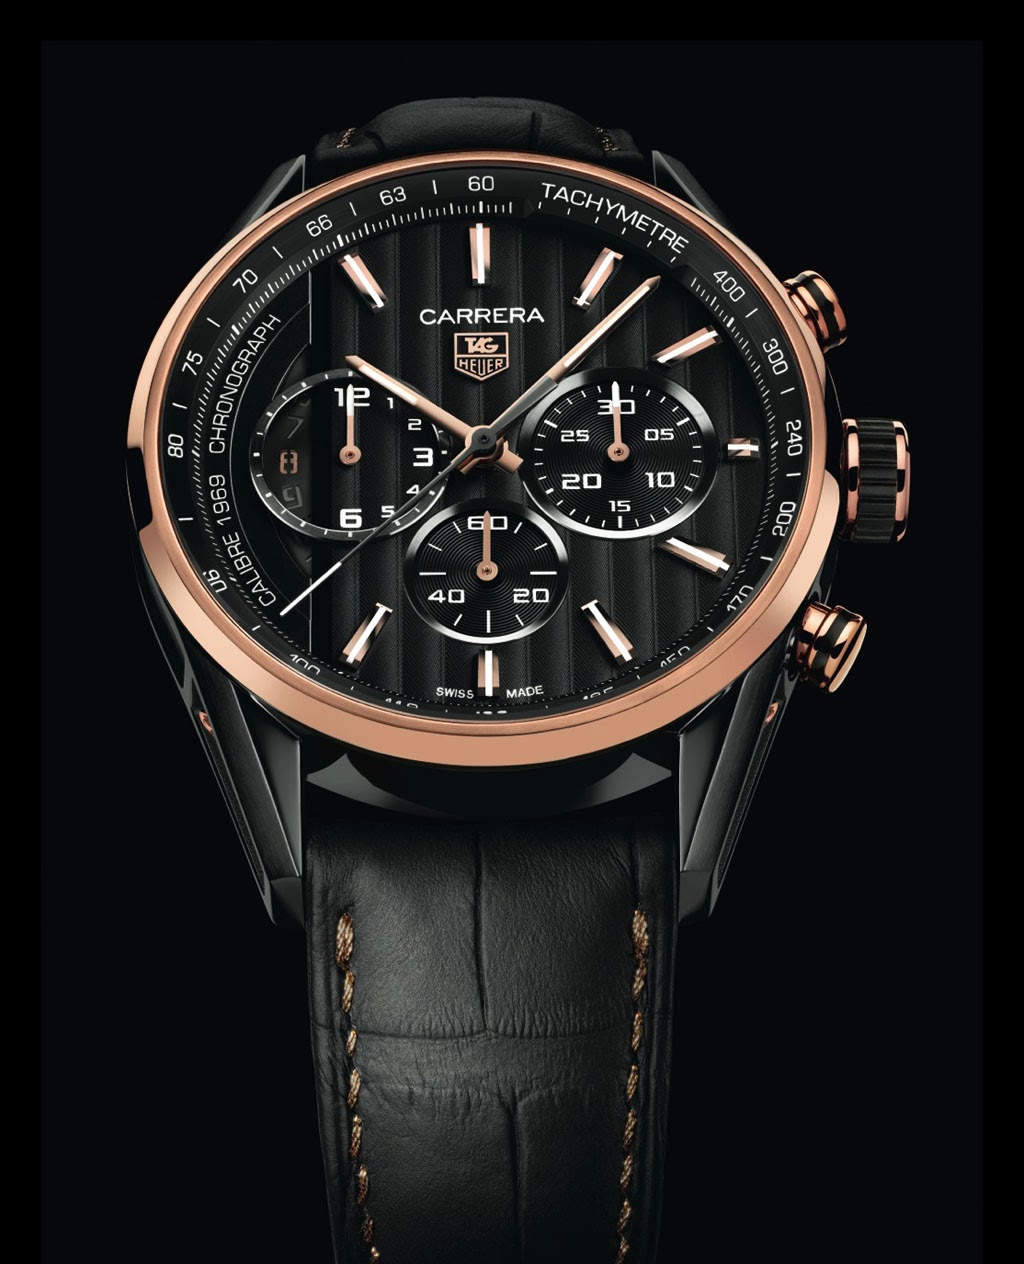 Tag Heuer - Carrera 1969 Titanium and Rose Gold  | Time and  Watches | The watch blog